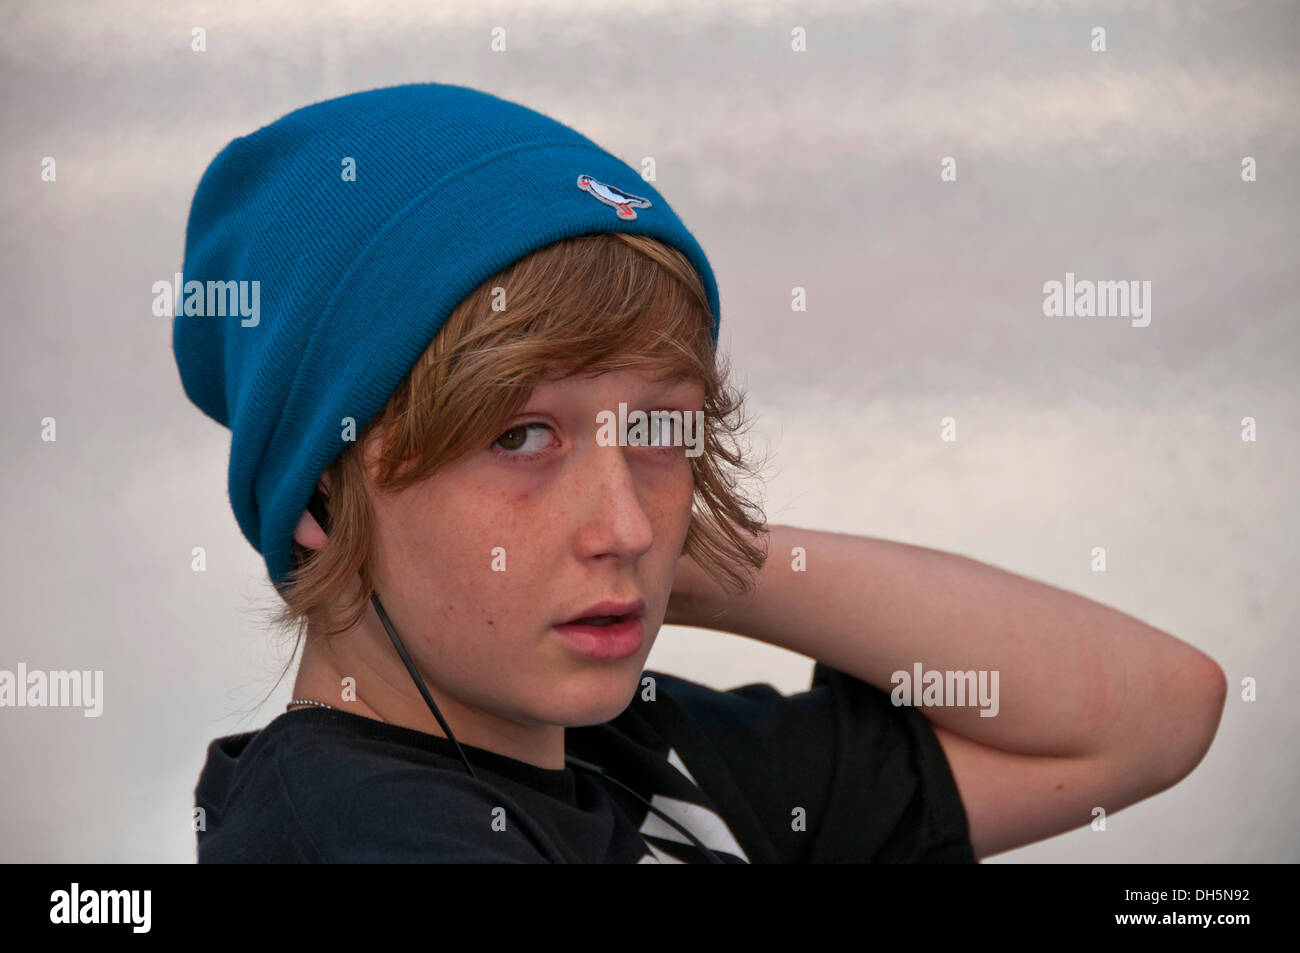 Boy, 12 years, looking bored, portrait Stock Photo